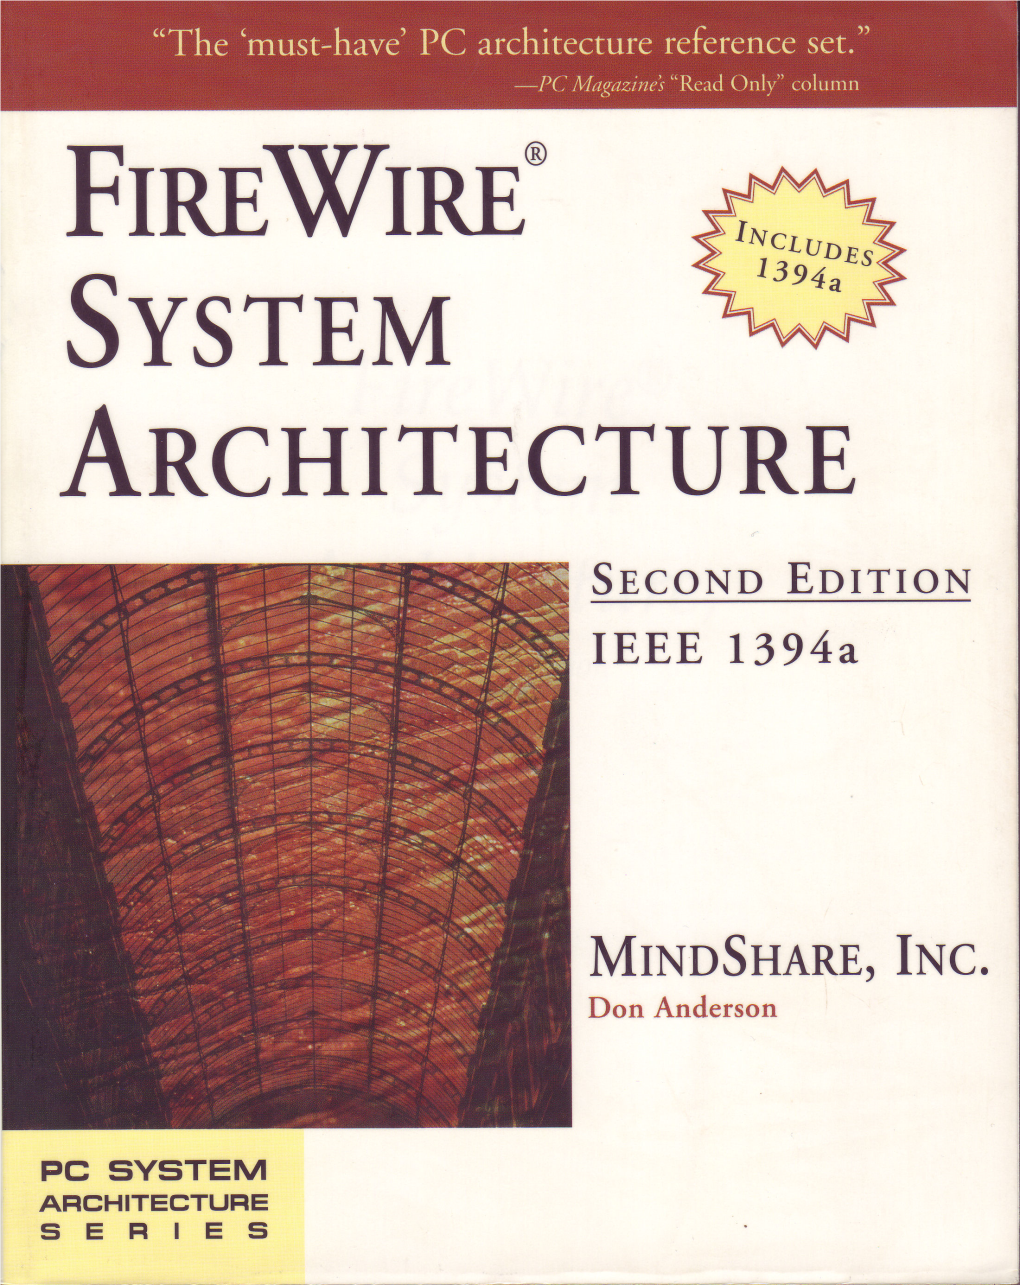 Firewire System Architecture, Second Edition